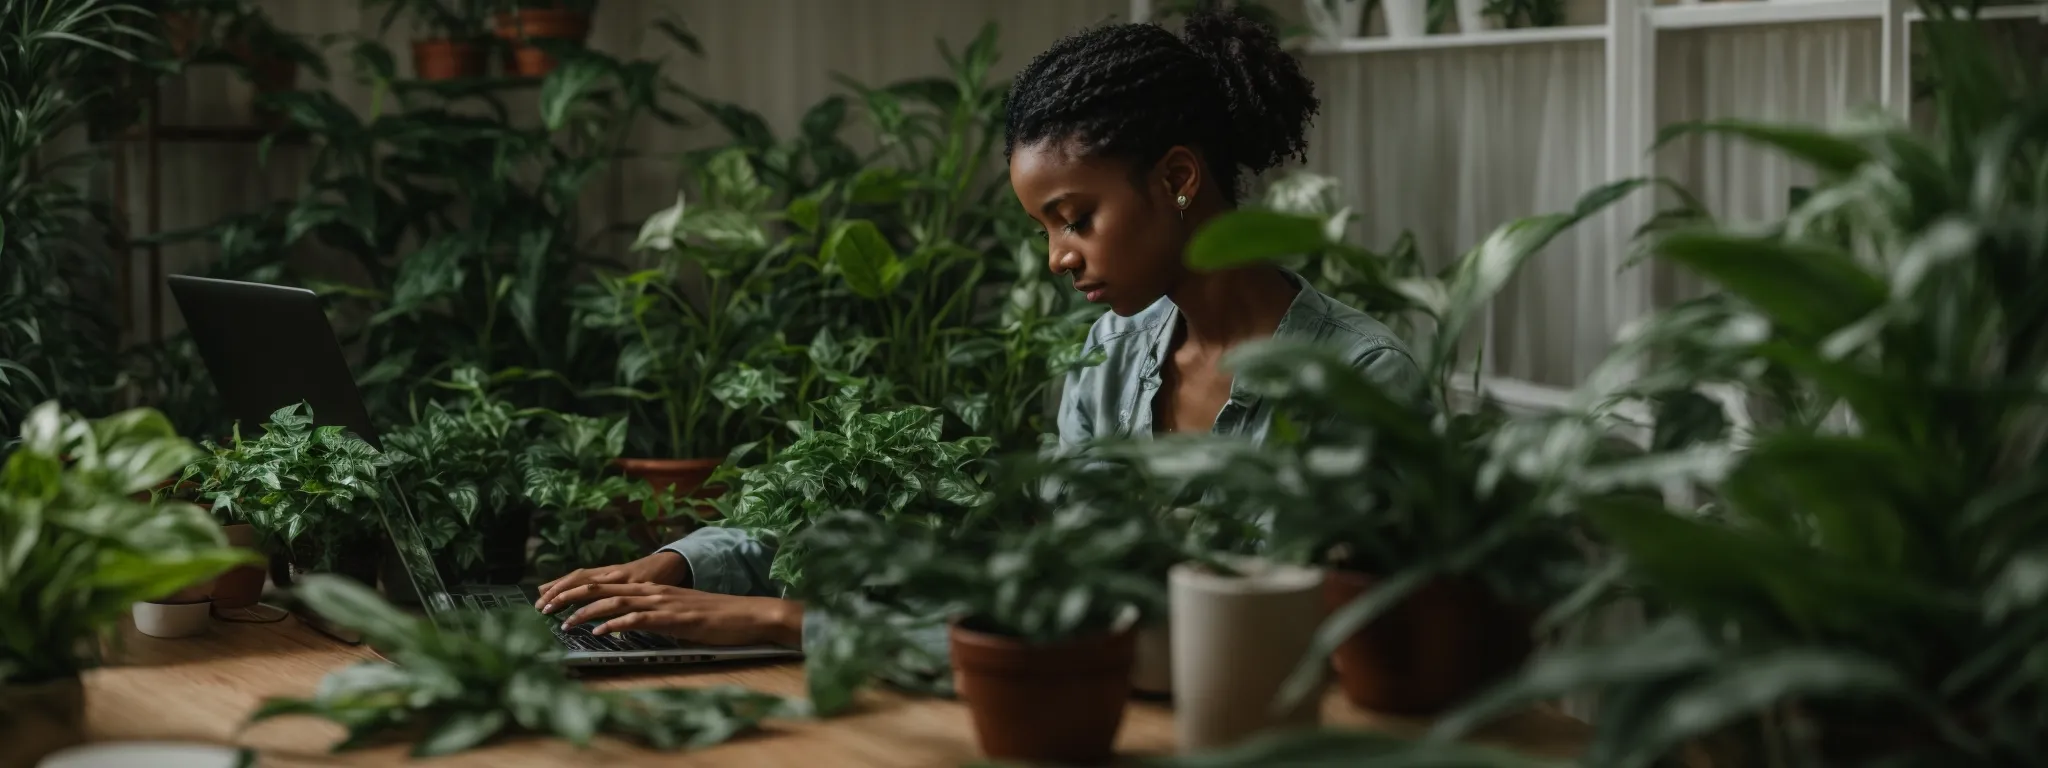 a person thoughtfully typing on a laptop, surrounded by verdant houseplants symbolizing growth and collaboration.